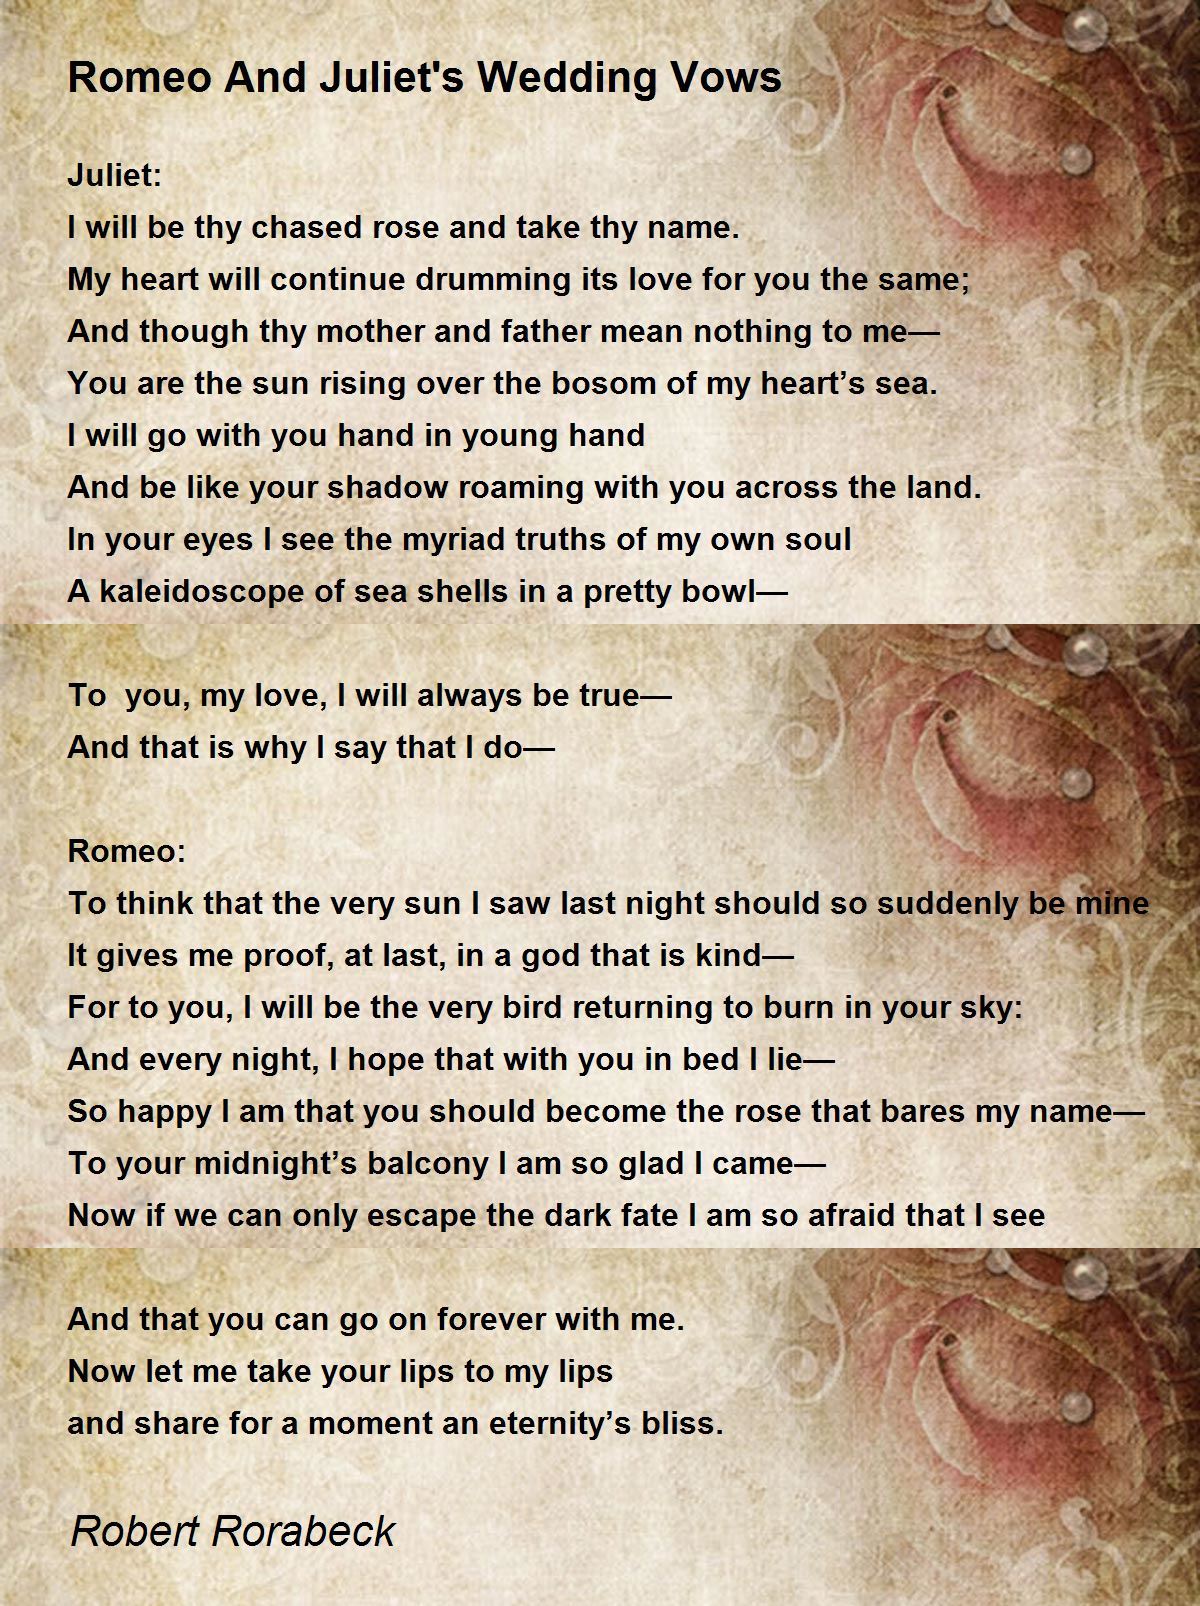 Romeo And Juliet's Wedding Vows Poem by Robert Rorabeck 